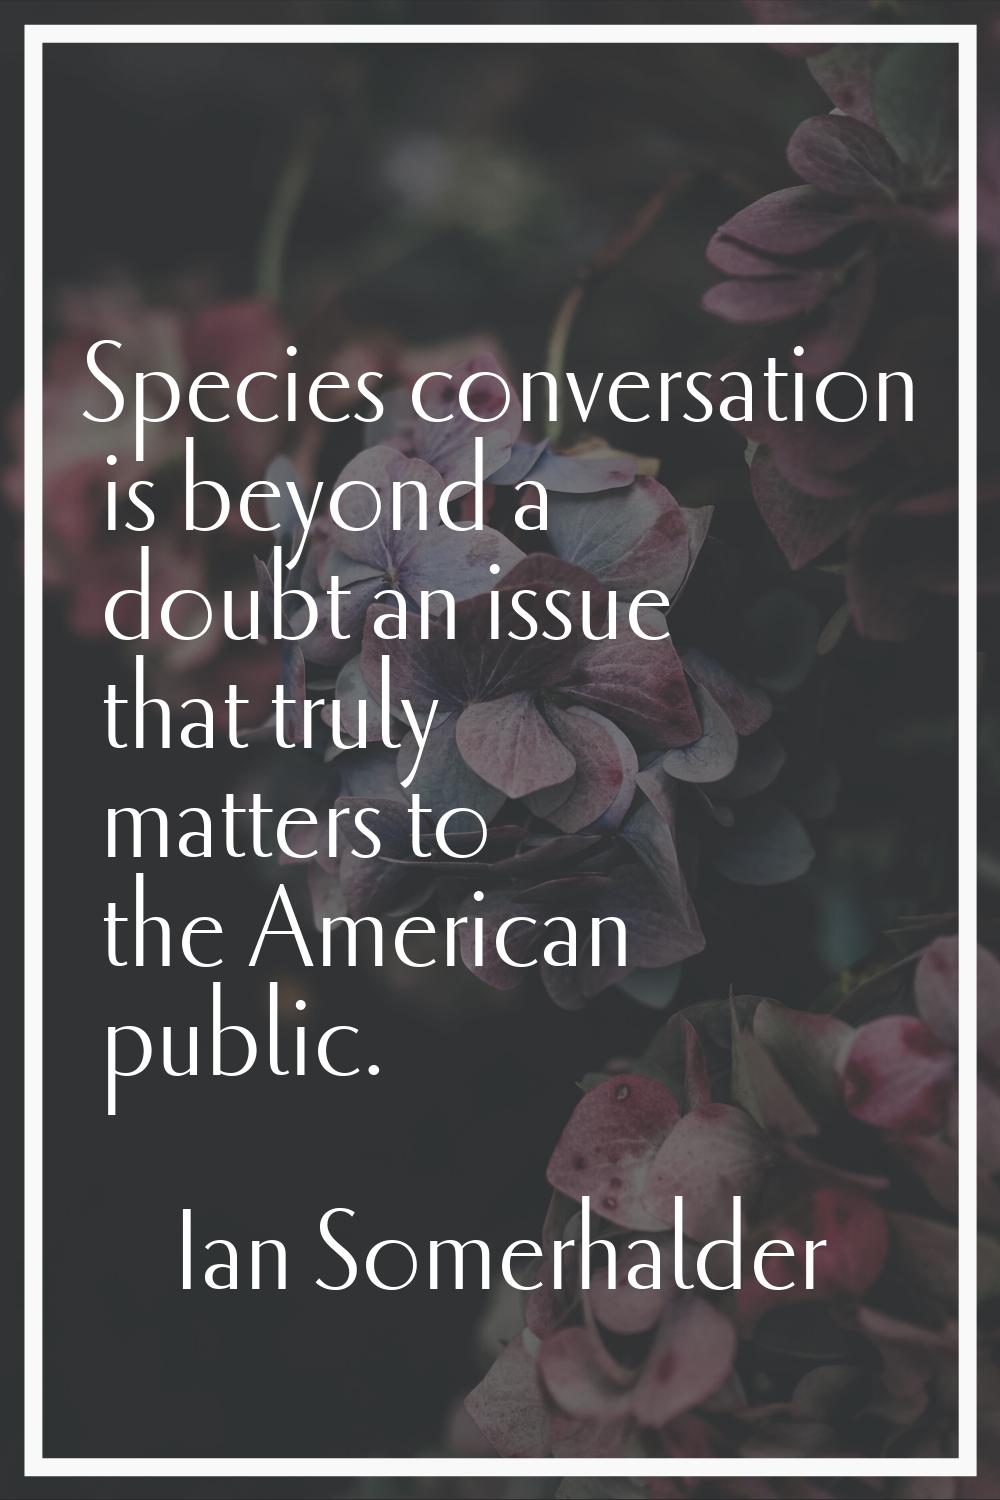 Species conversation is beyond a doubt an issue that truly matters to the American public.